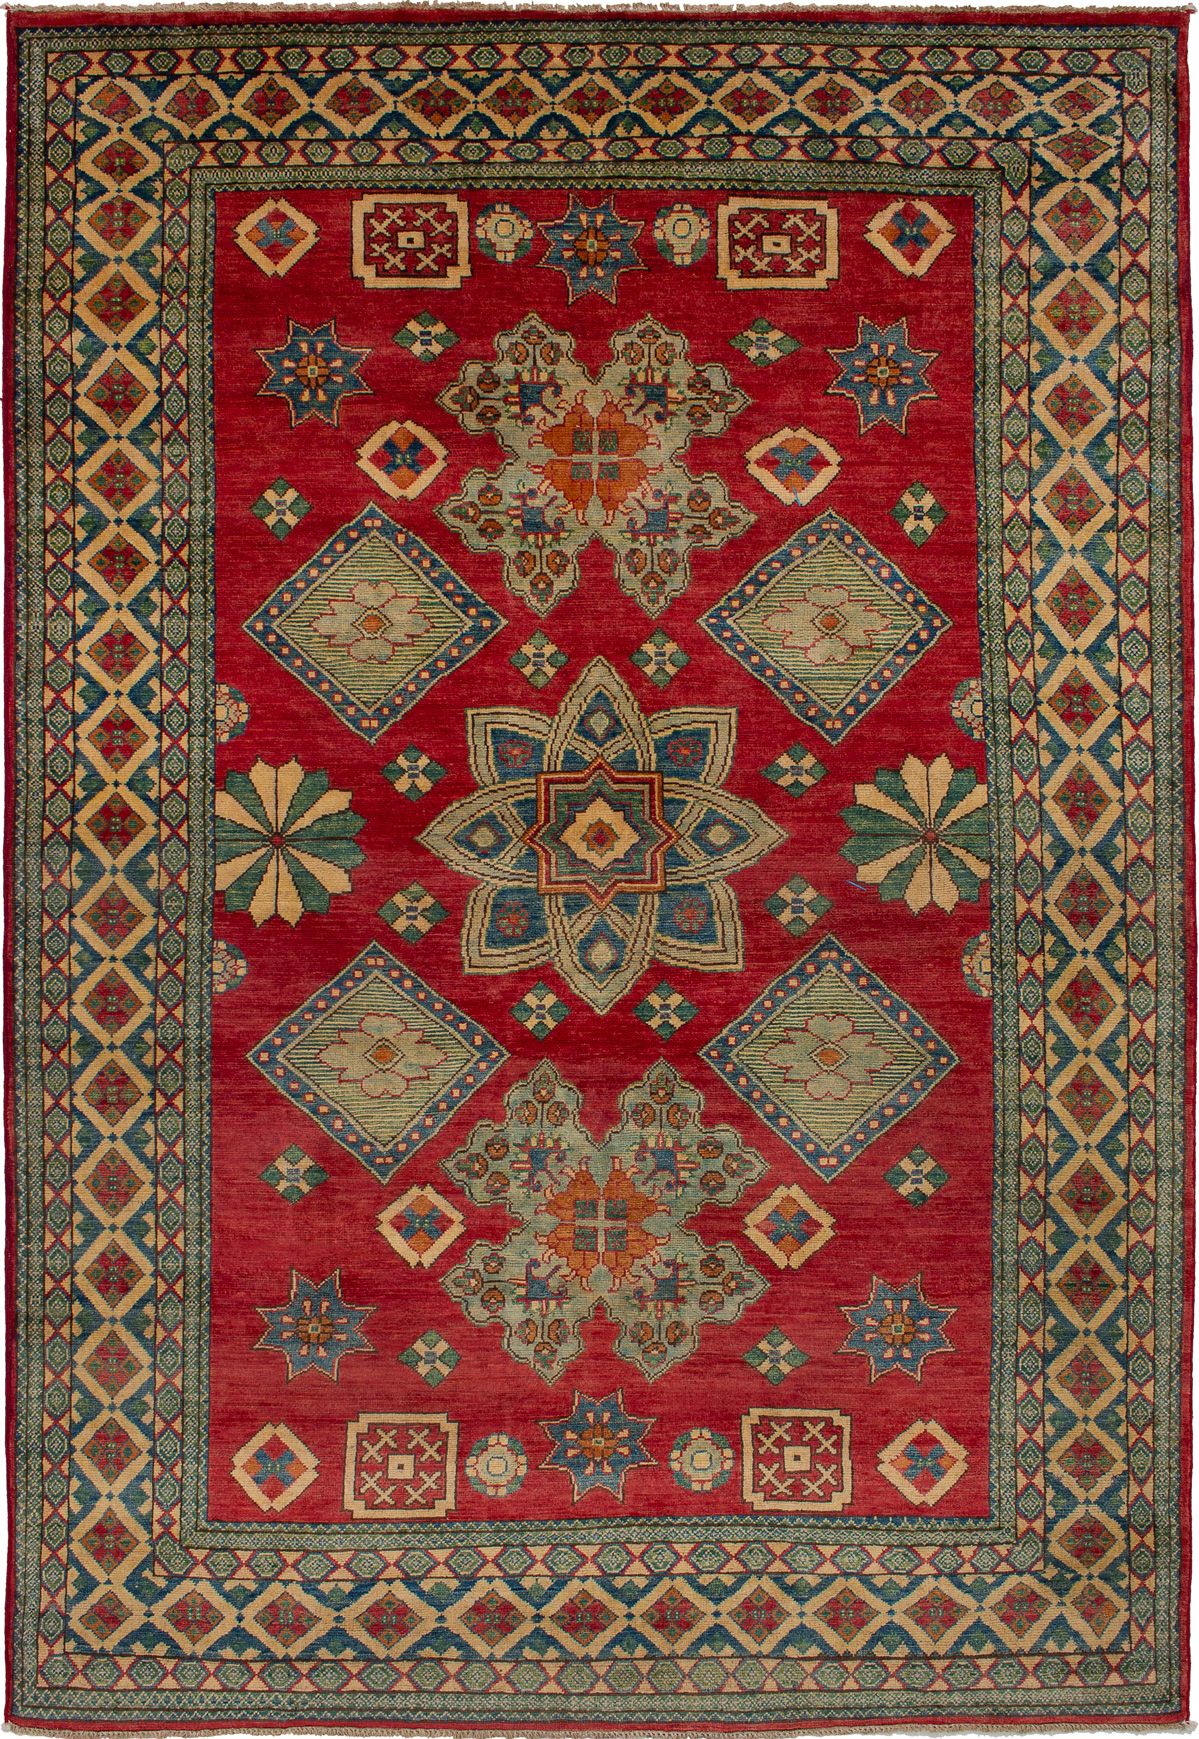 Hand-knotted Finest Gazni Red Wool Rug 6'5" x 9'7"  Size: 6'5" x 9'7"  